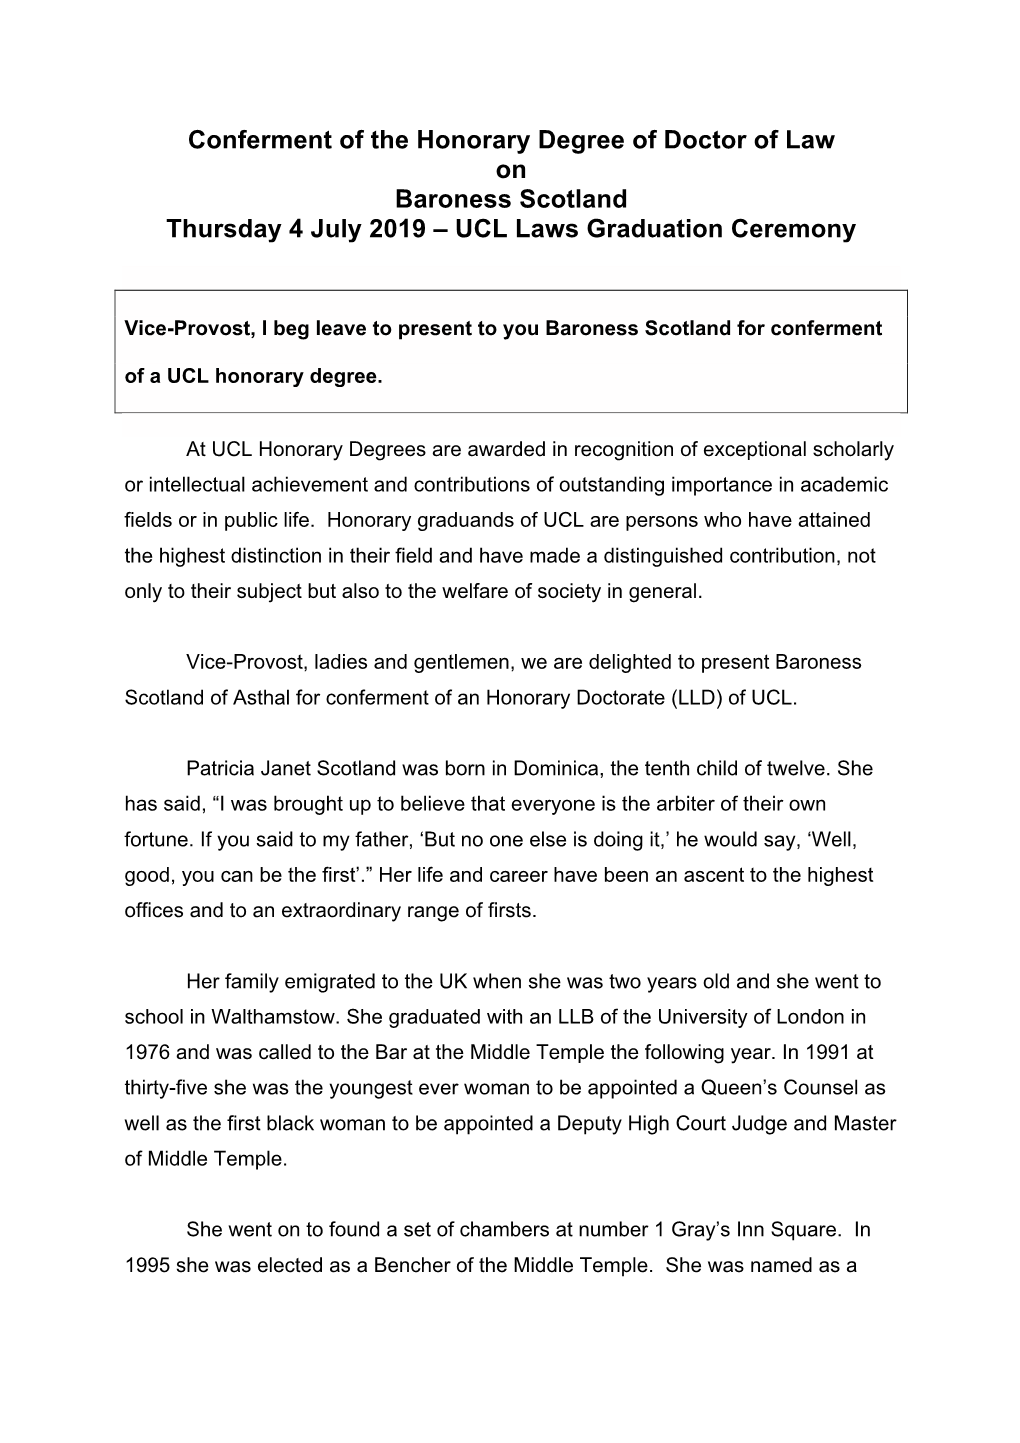 Conferment of the Honorary Degree of Doctor of Law on Baroness Scotland Thursday 4 July 2019 – UCL Laws Graduation Ceremony